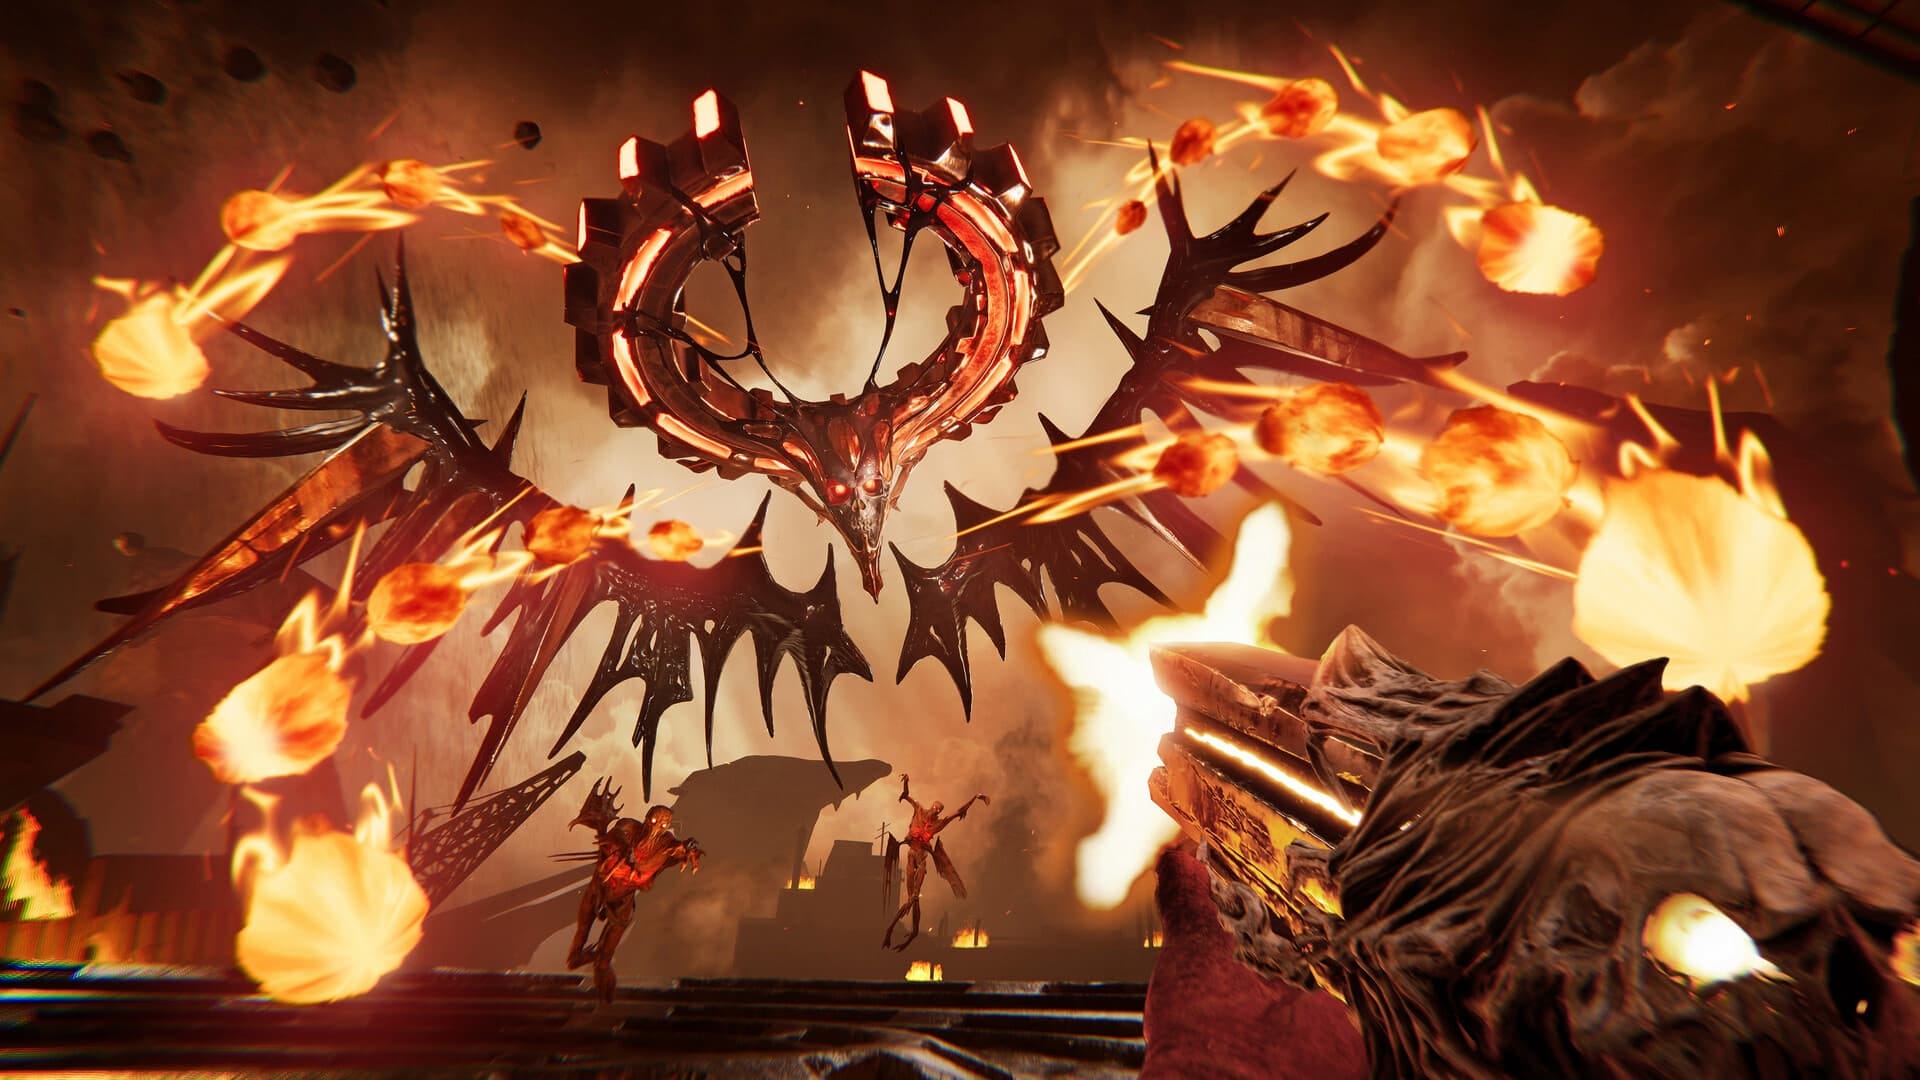 Metal Hellsinger steam screenshot where we see a player blasting at a giant metal demon with wings in a blaze of fire and glory,Metal: Hellsinger accessibility update